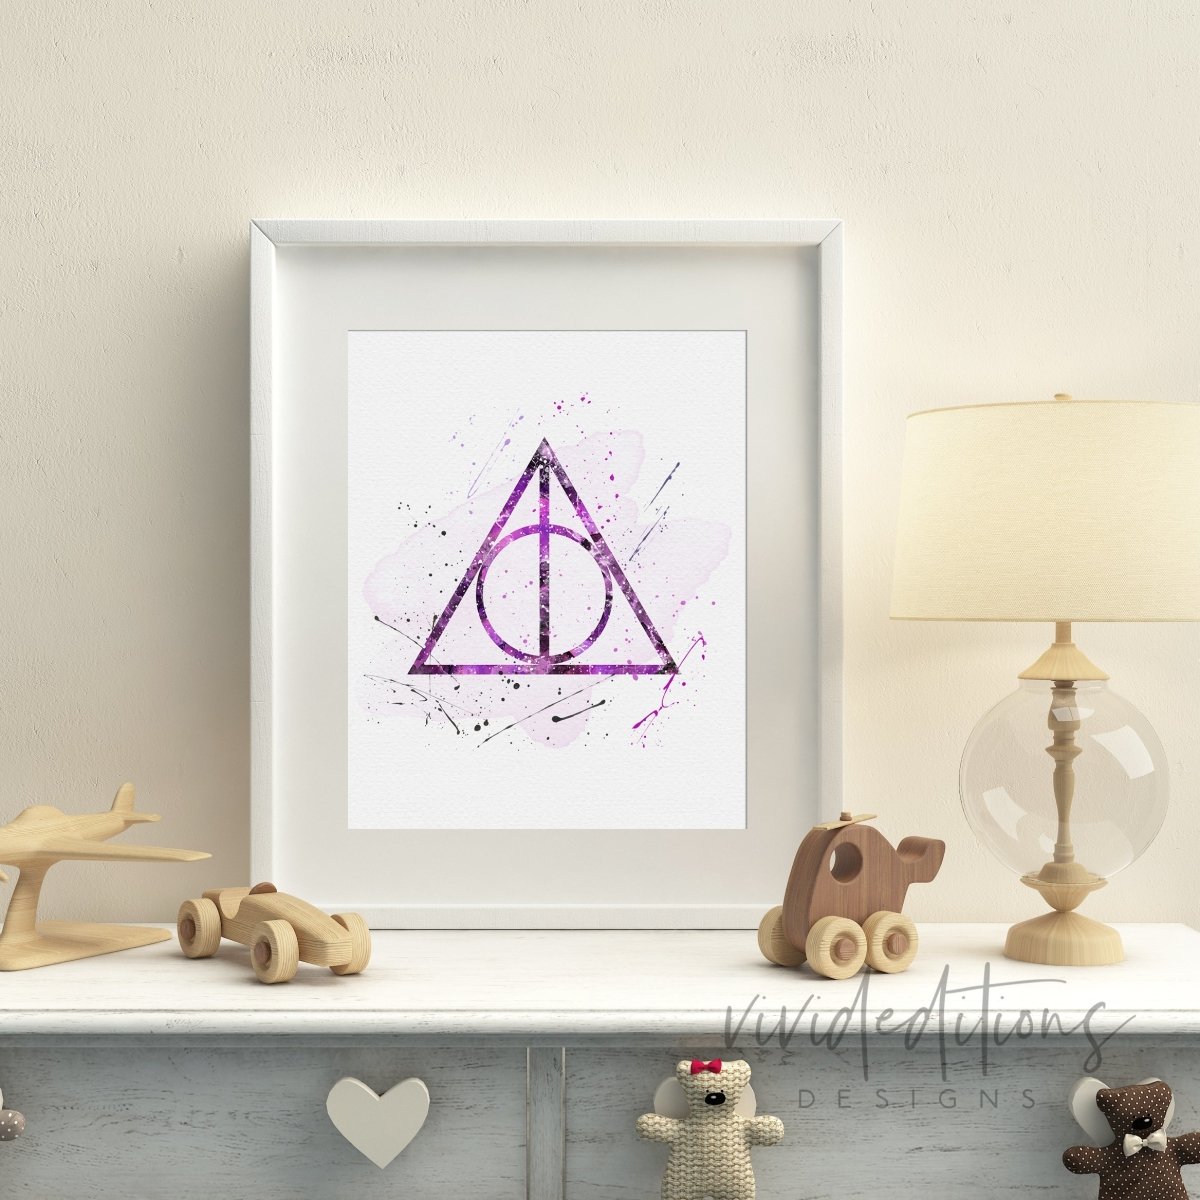 The Deathly Hallows 2, Harry Potter Watercolor Art Print Print - VividEditions